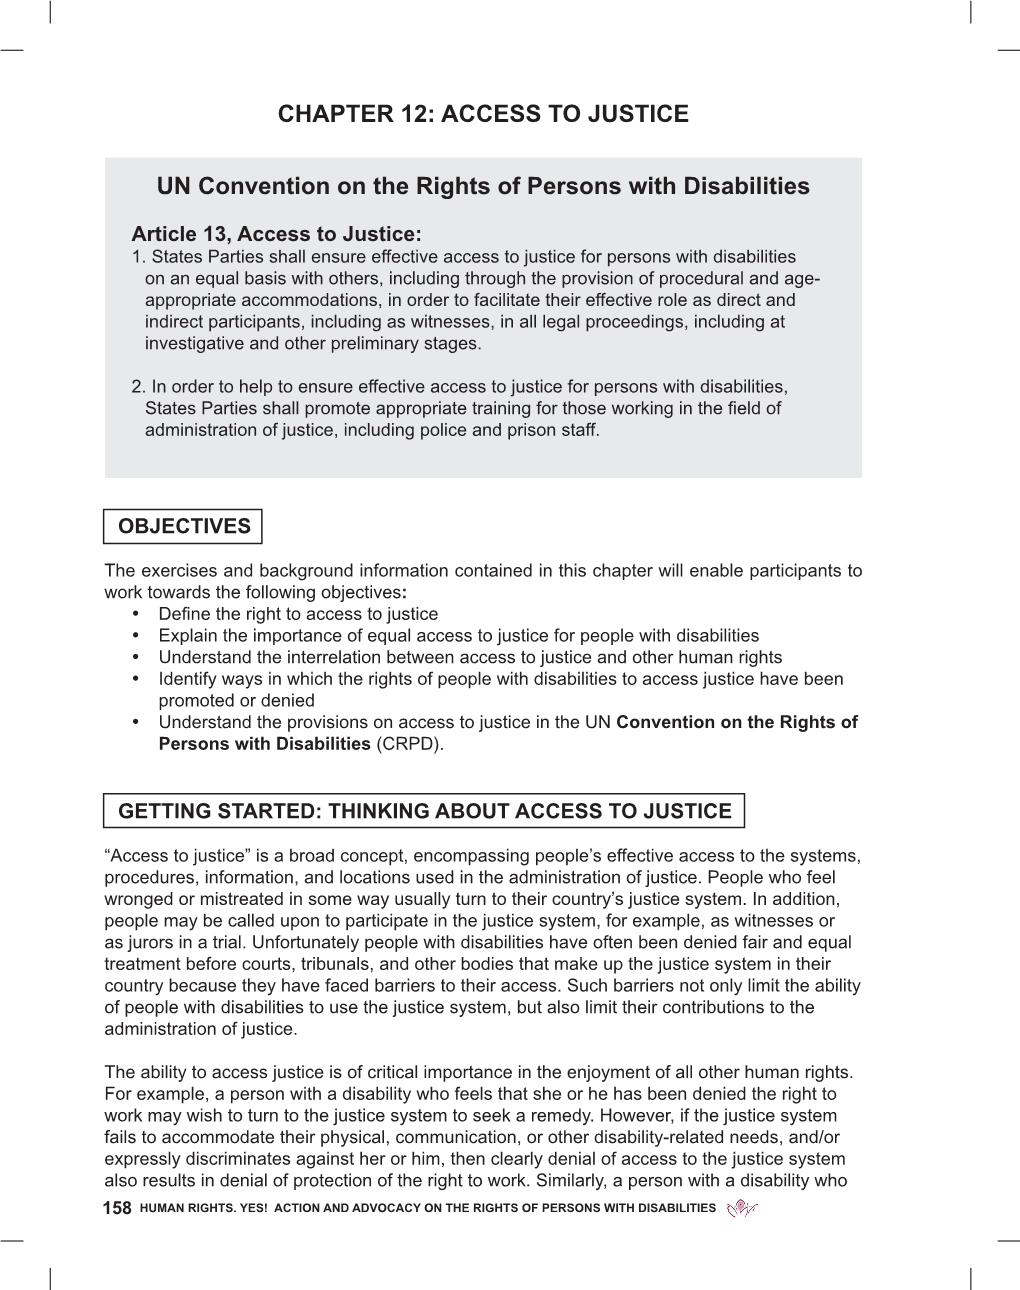 Access to Justice Un Convention on the Rights of Persons with Disabilities